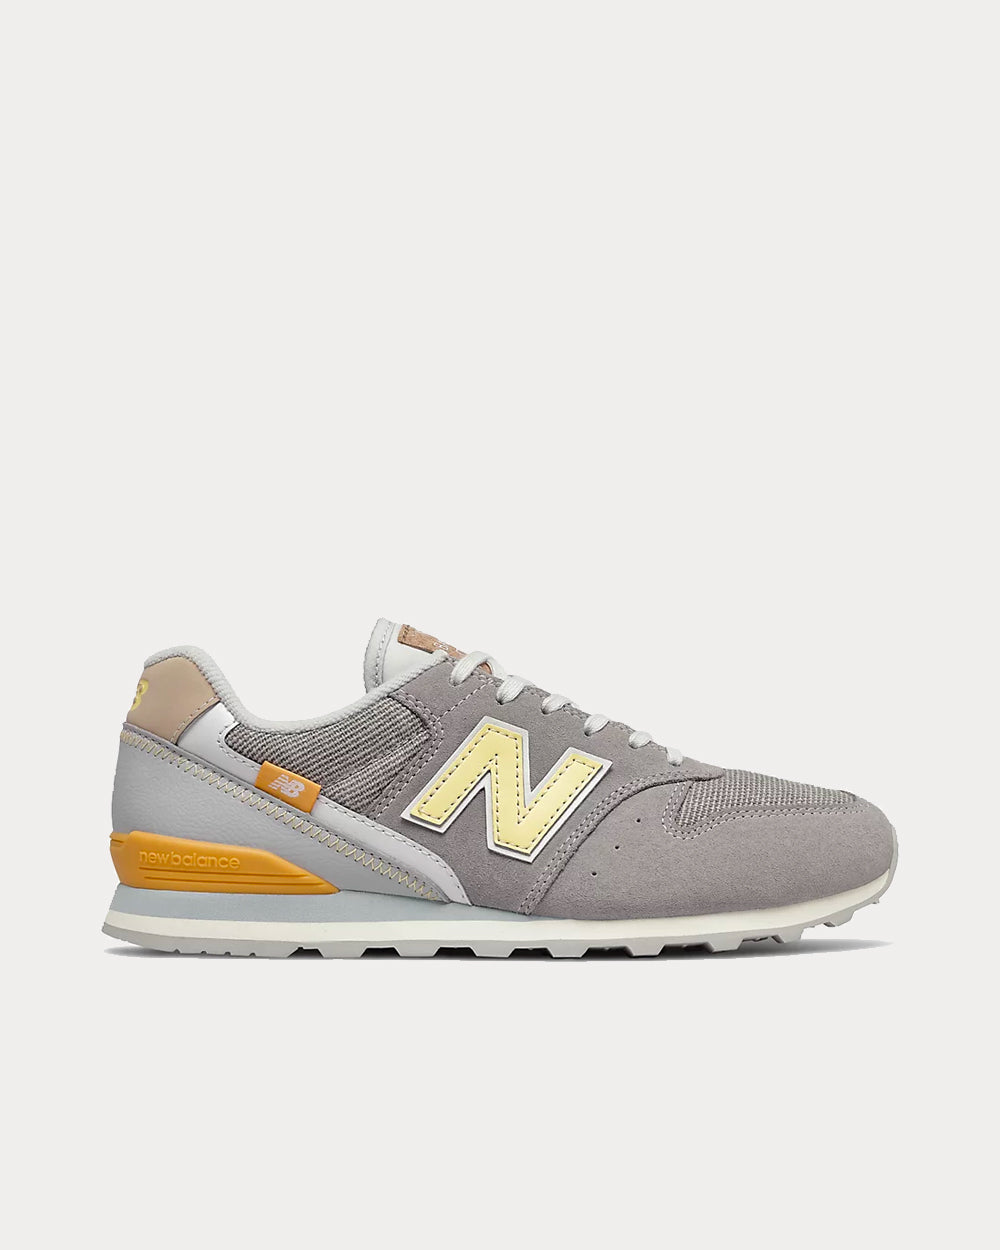 Rapid lifetime Susceptible to New Balance 996 Marblehead with Lemon Haze Low Top Sneakers - Sneak in Peace